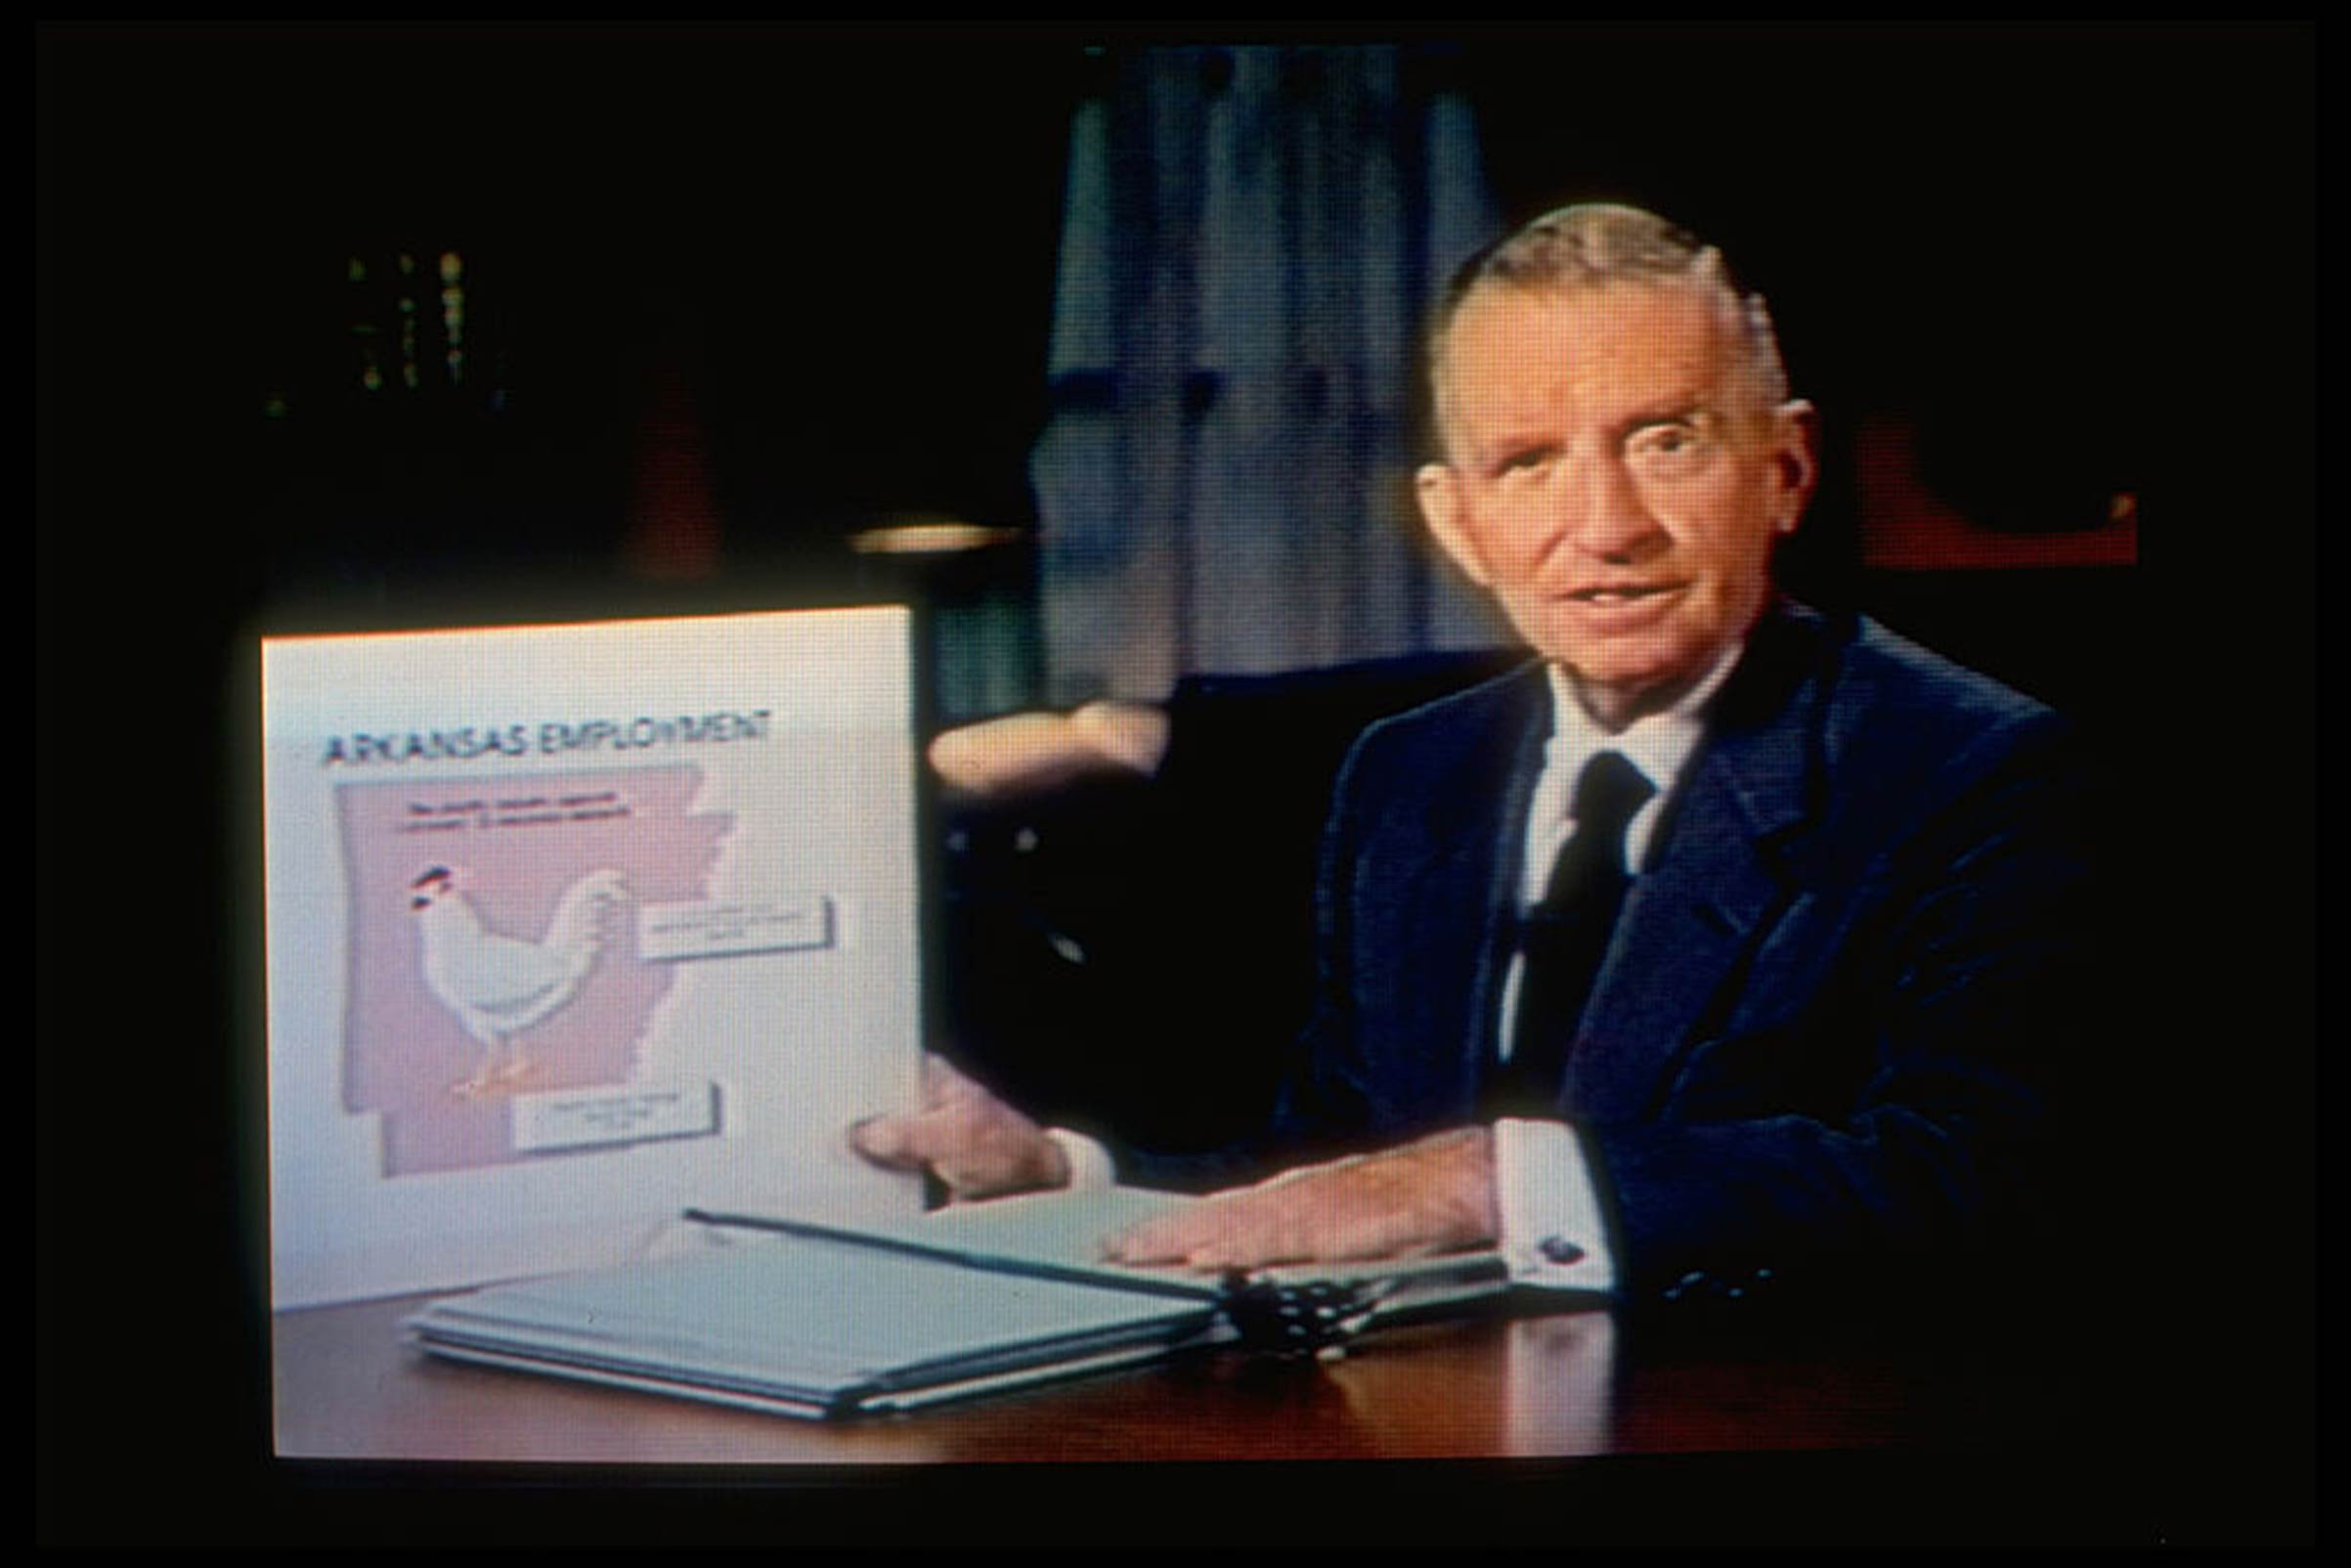 Texas magnate Ross Perot displaying an Arkansas state employment record chart to attack candidate Bill Clinton in a self-financed TV program that aired on Nov. 1, 1992. (Ted Thai—LIFE Images Collection/Getty Images)